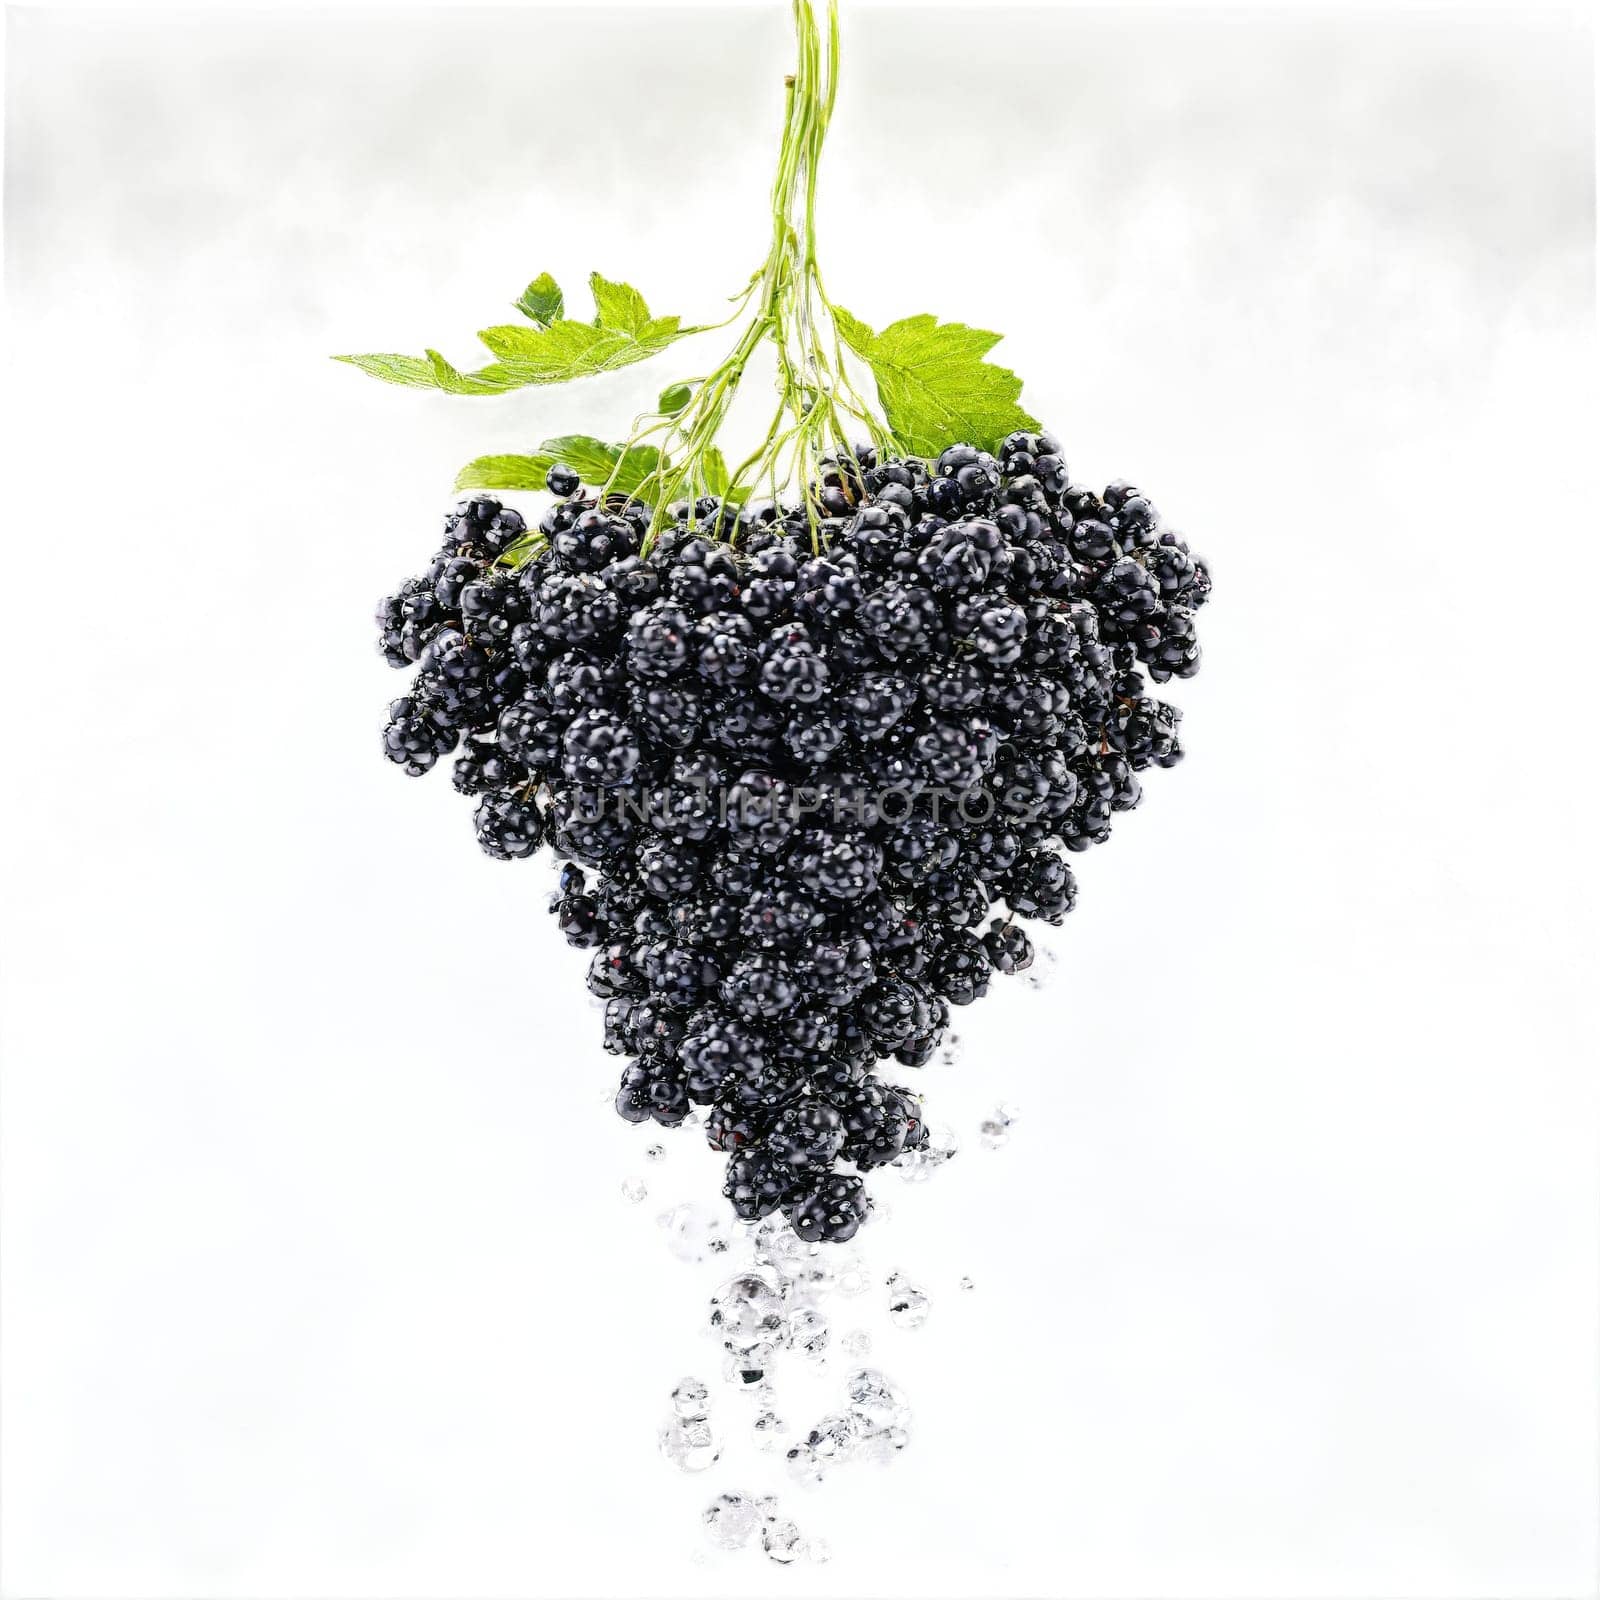 Elderberry with clusters of dark berries and water droplets frozen Food and culinary concept by panophotograph